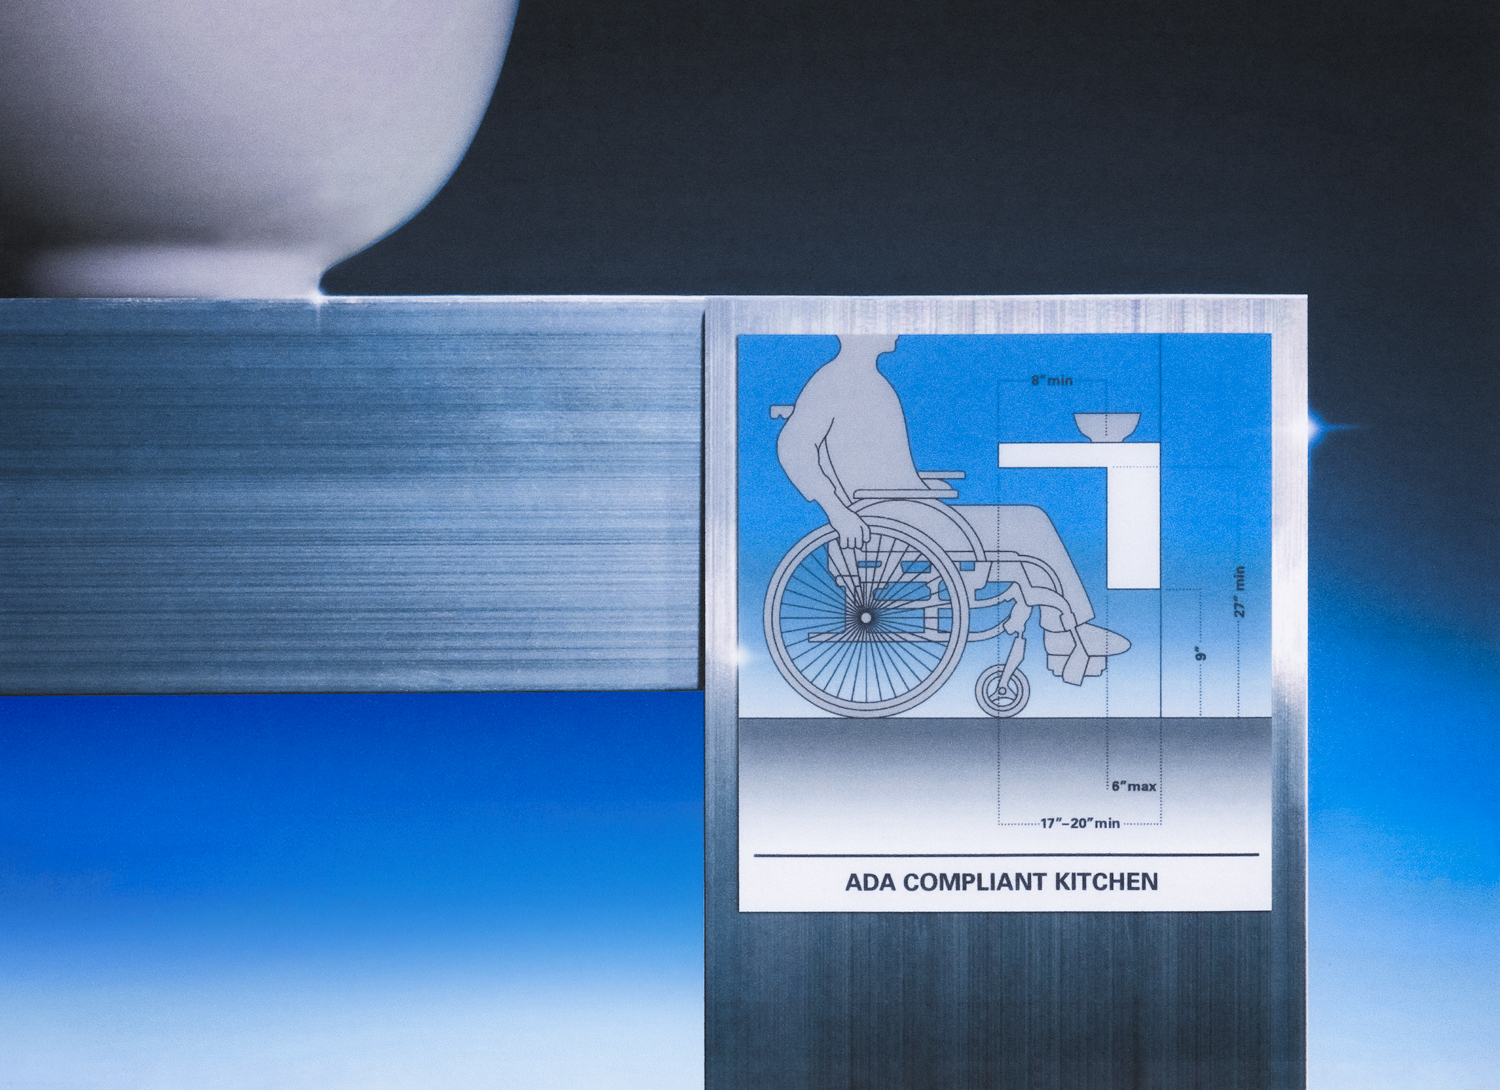 An illustrated, wheelchair-bound figure is constrained in a box set on an ombre black-to-blue background. The corner of a white bowl sits in the upper left hand corner.